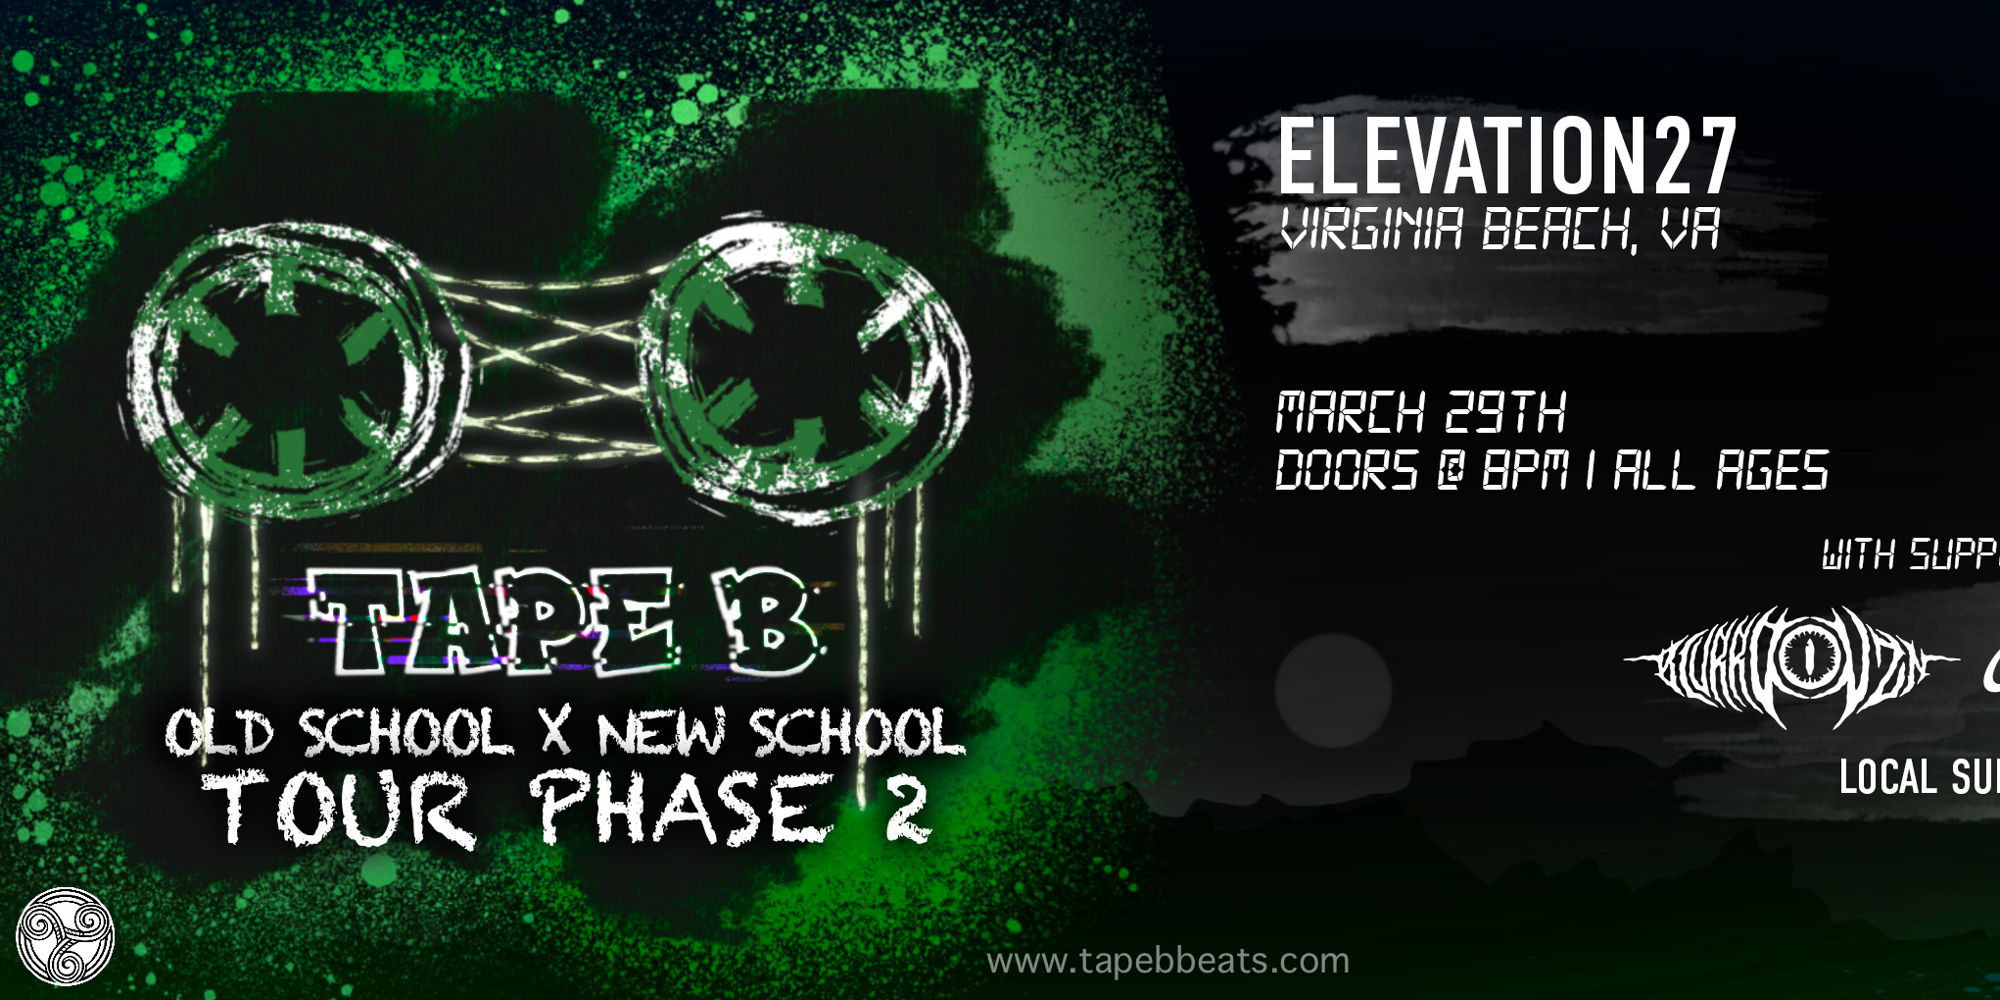 Tape B: Old School x New School Tour Phase 2 at Elevation 27 promotional image